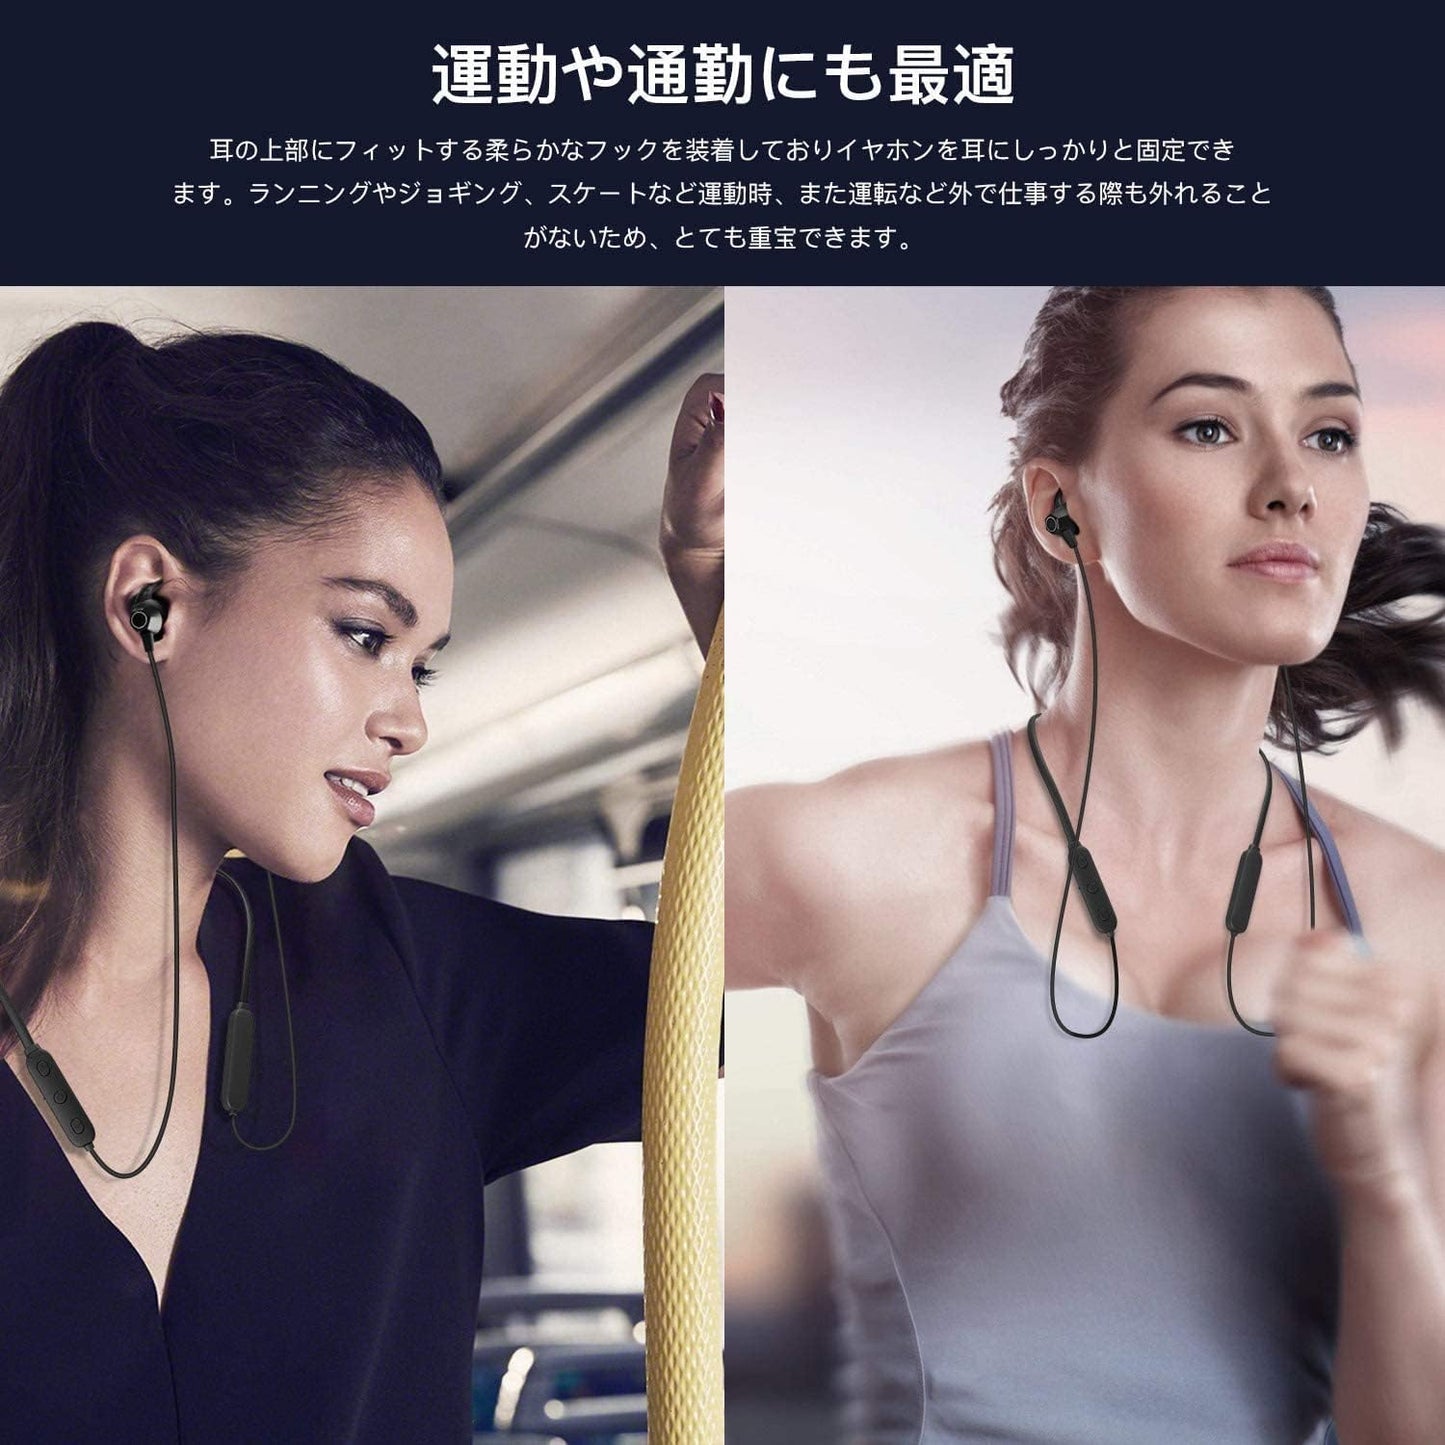 Techno Bravo-B1 Bluetooth 5.0, Wireless Earphones, apt-X AAC Compatible, 7 Hours Continuous Playback, Automatic Pairing, Noise Canceling, Bluetooth Earphones, Hi-Fi Sound Quality, IPX7 Waterproof, Built-in Mic